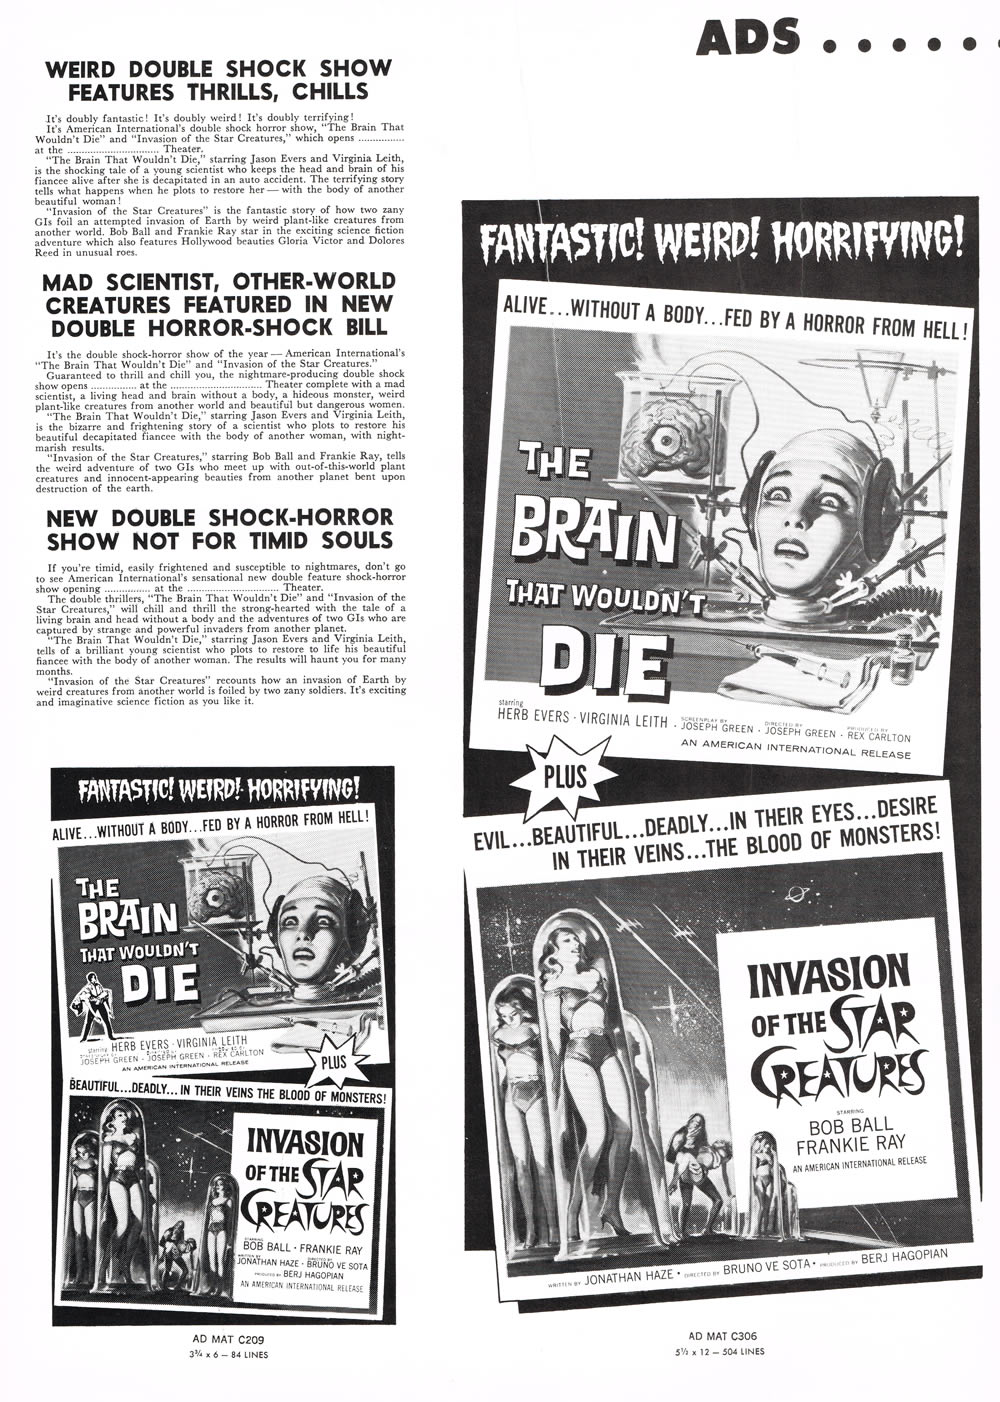 The Brain that wouldn't die Poster